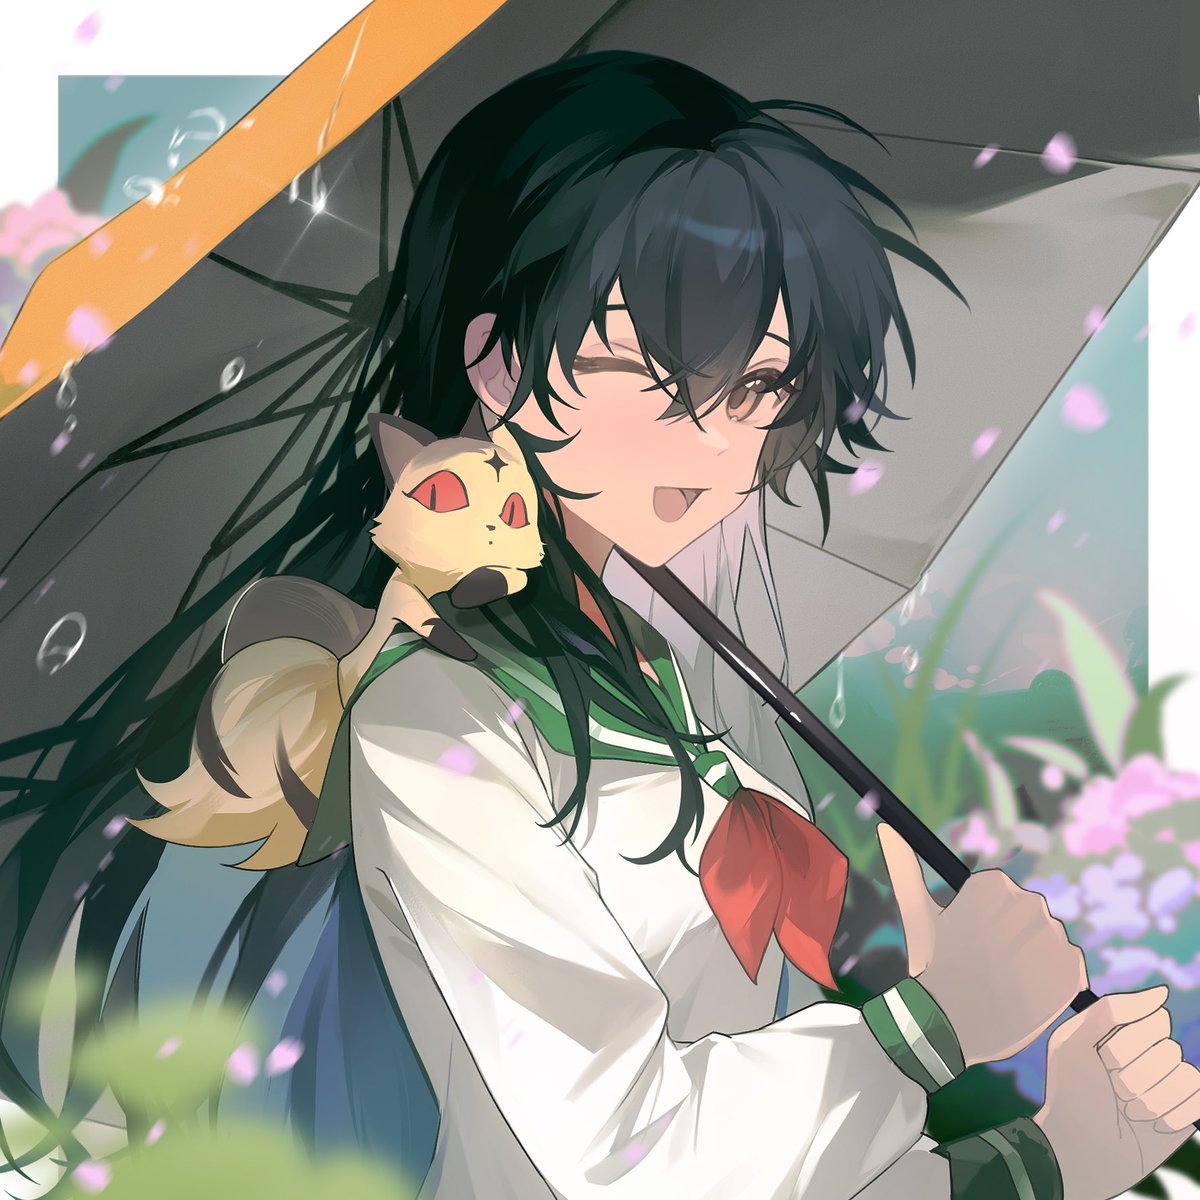 Eyes are raining for her，heart is holding umbrella for her.（Tagore）
#kagome 
#かごめ 
#日暮かごめ 
#inuyasha 
#犬夜叉